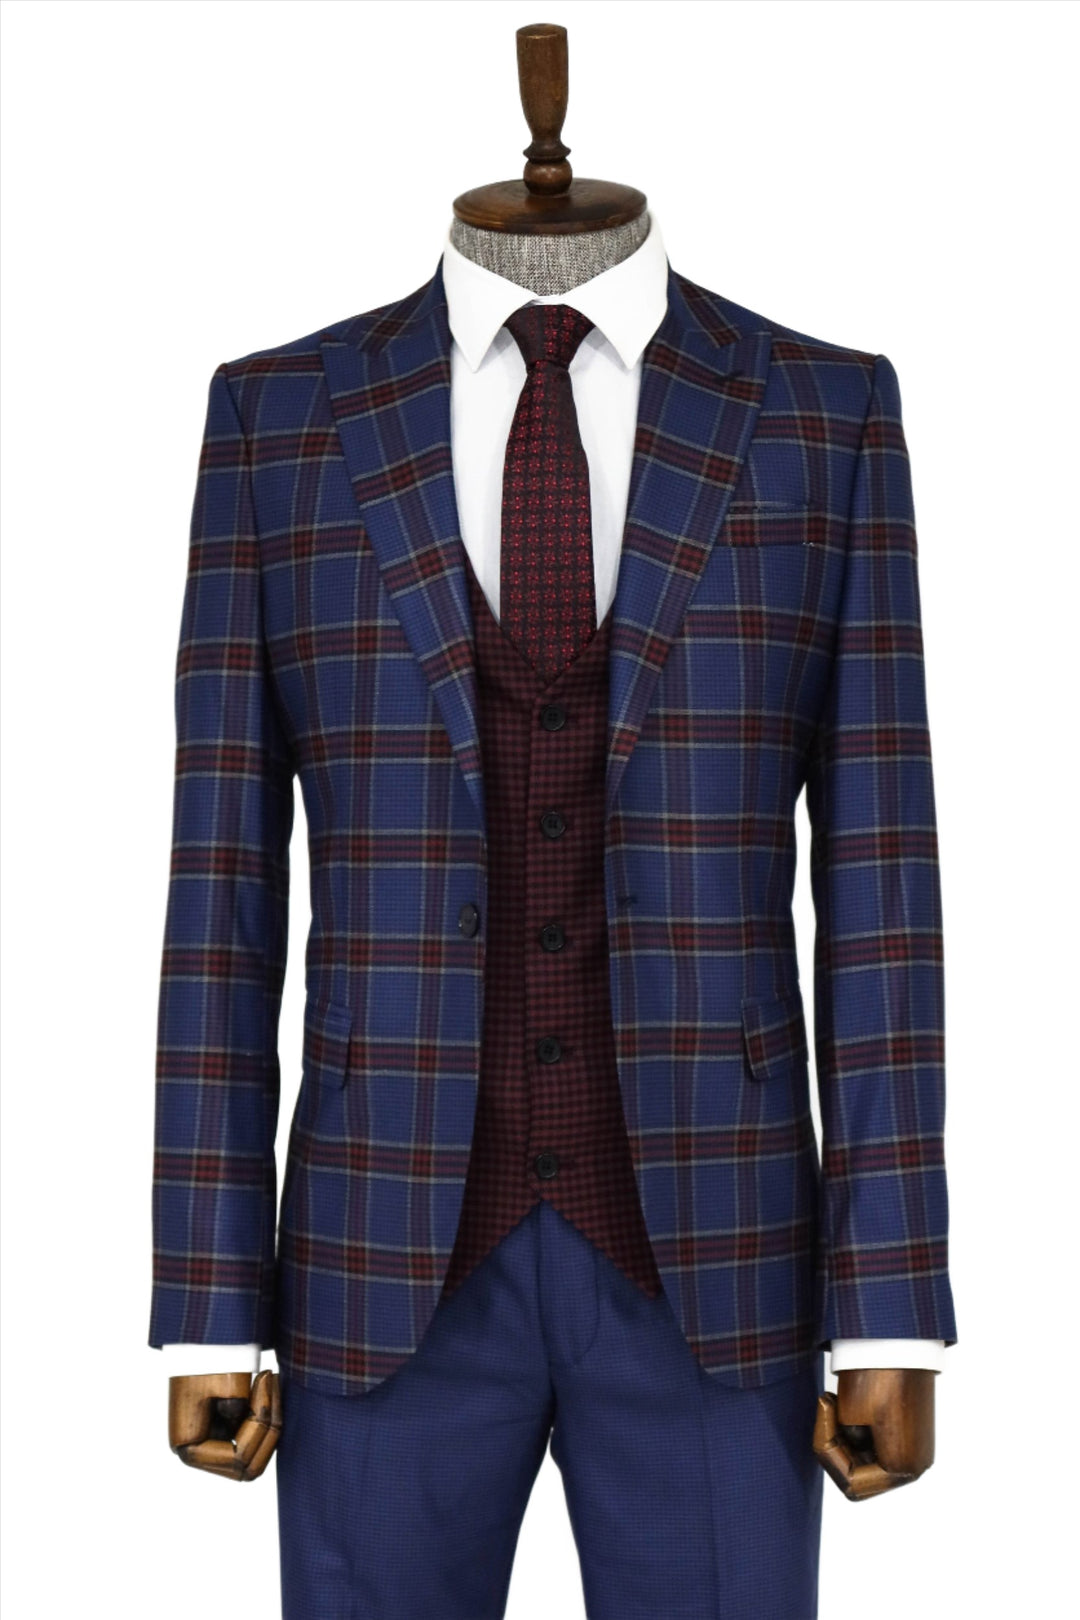 Patterned Checked Slim Fit Blue Men Suit and Shirt Combination- Wessi